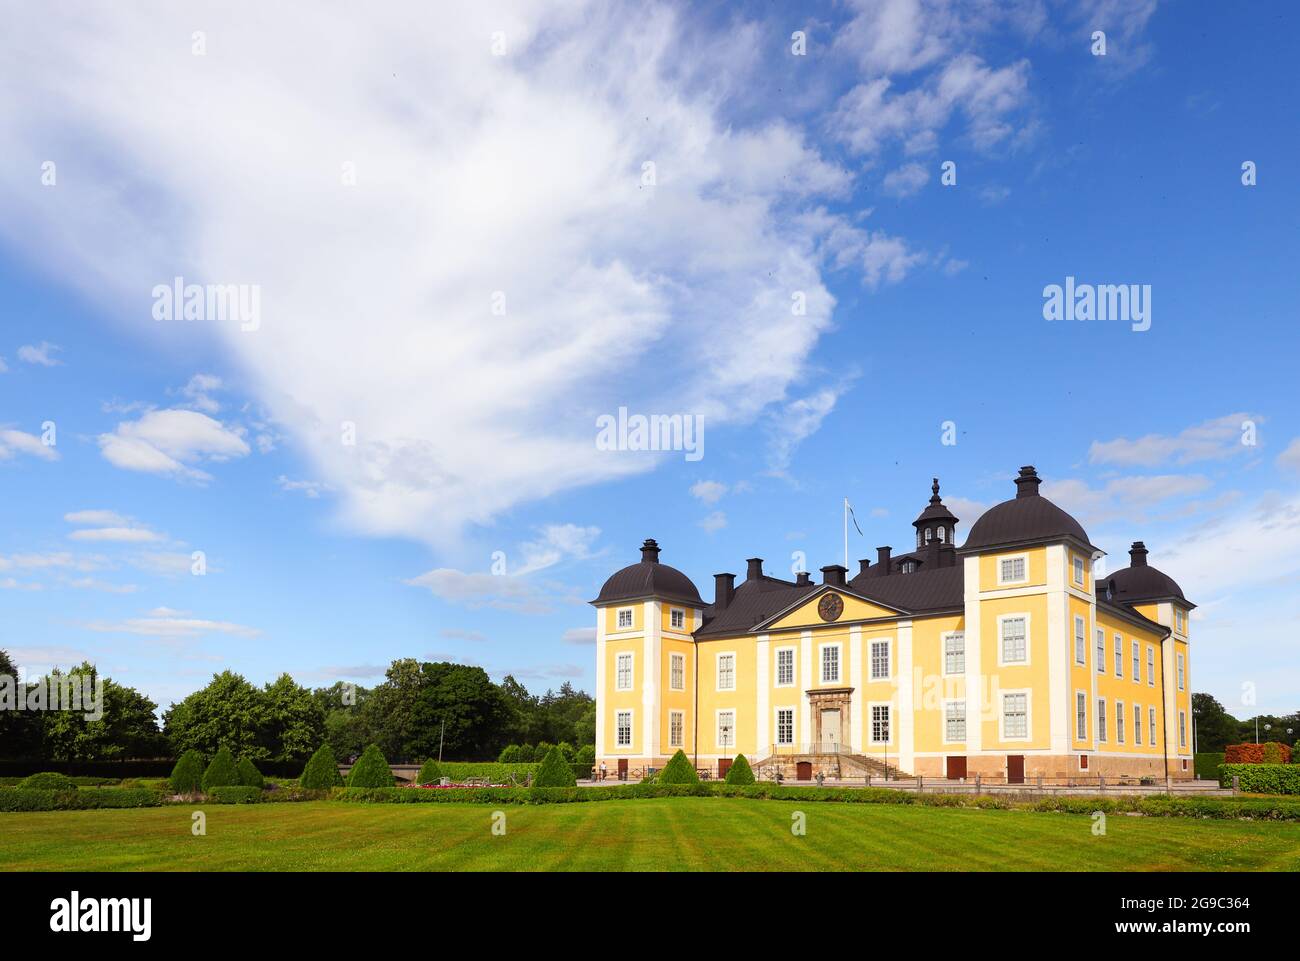 Exterior view of the Stromsholm palace located in Swedish province of Vastmanland. Stock Photo